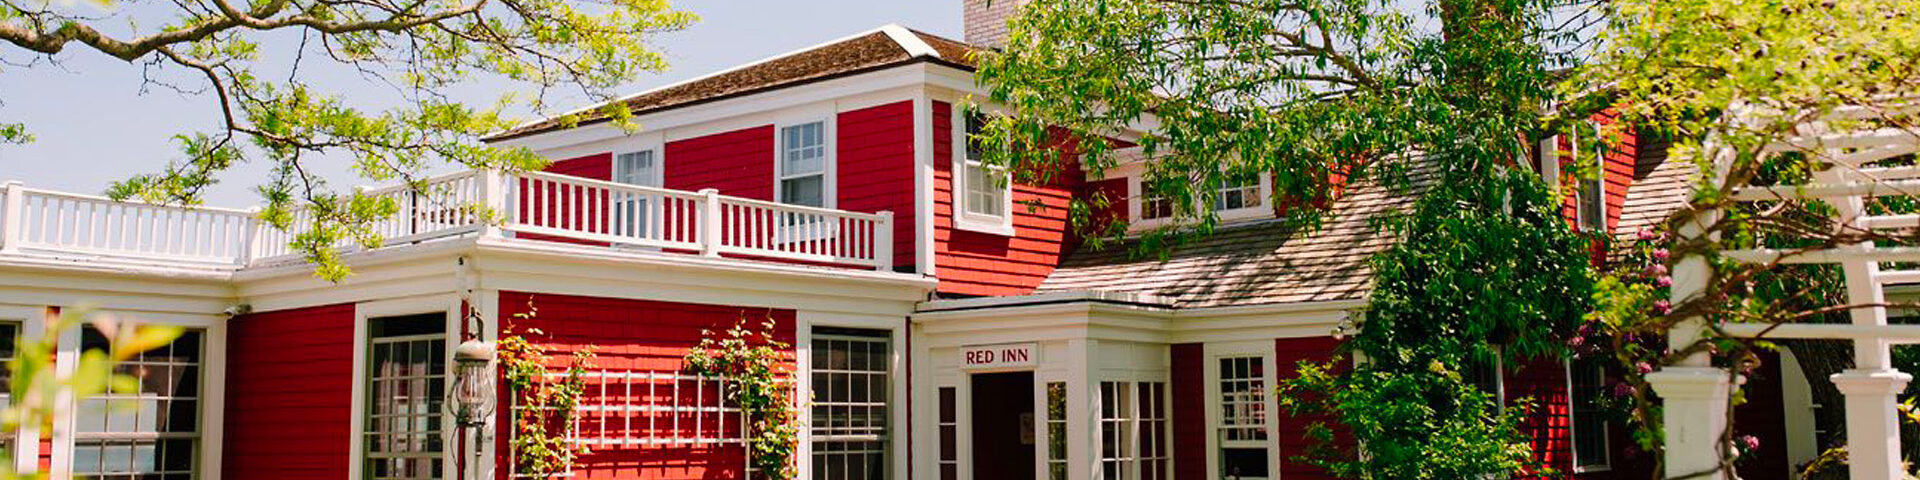 The Red Inn - Provincetown